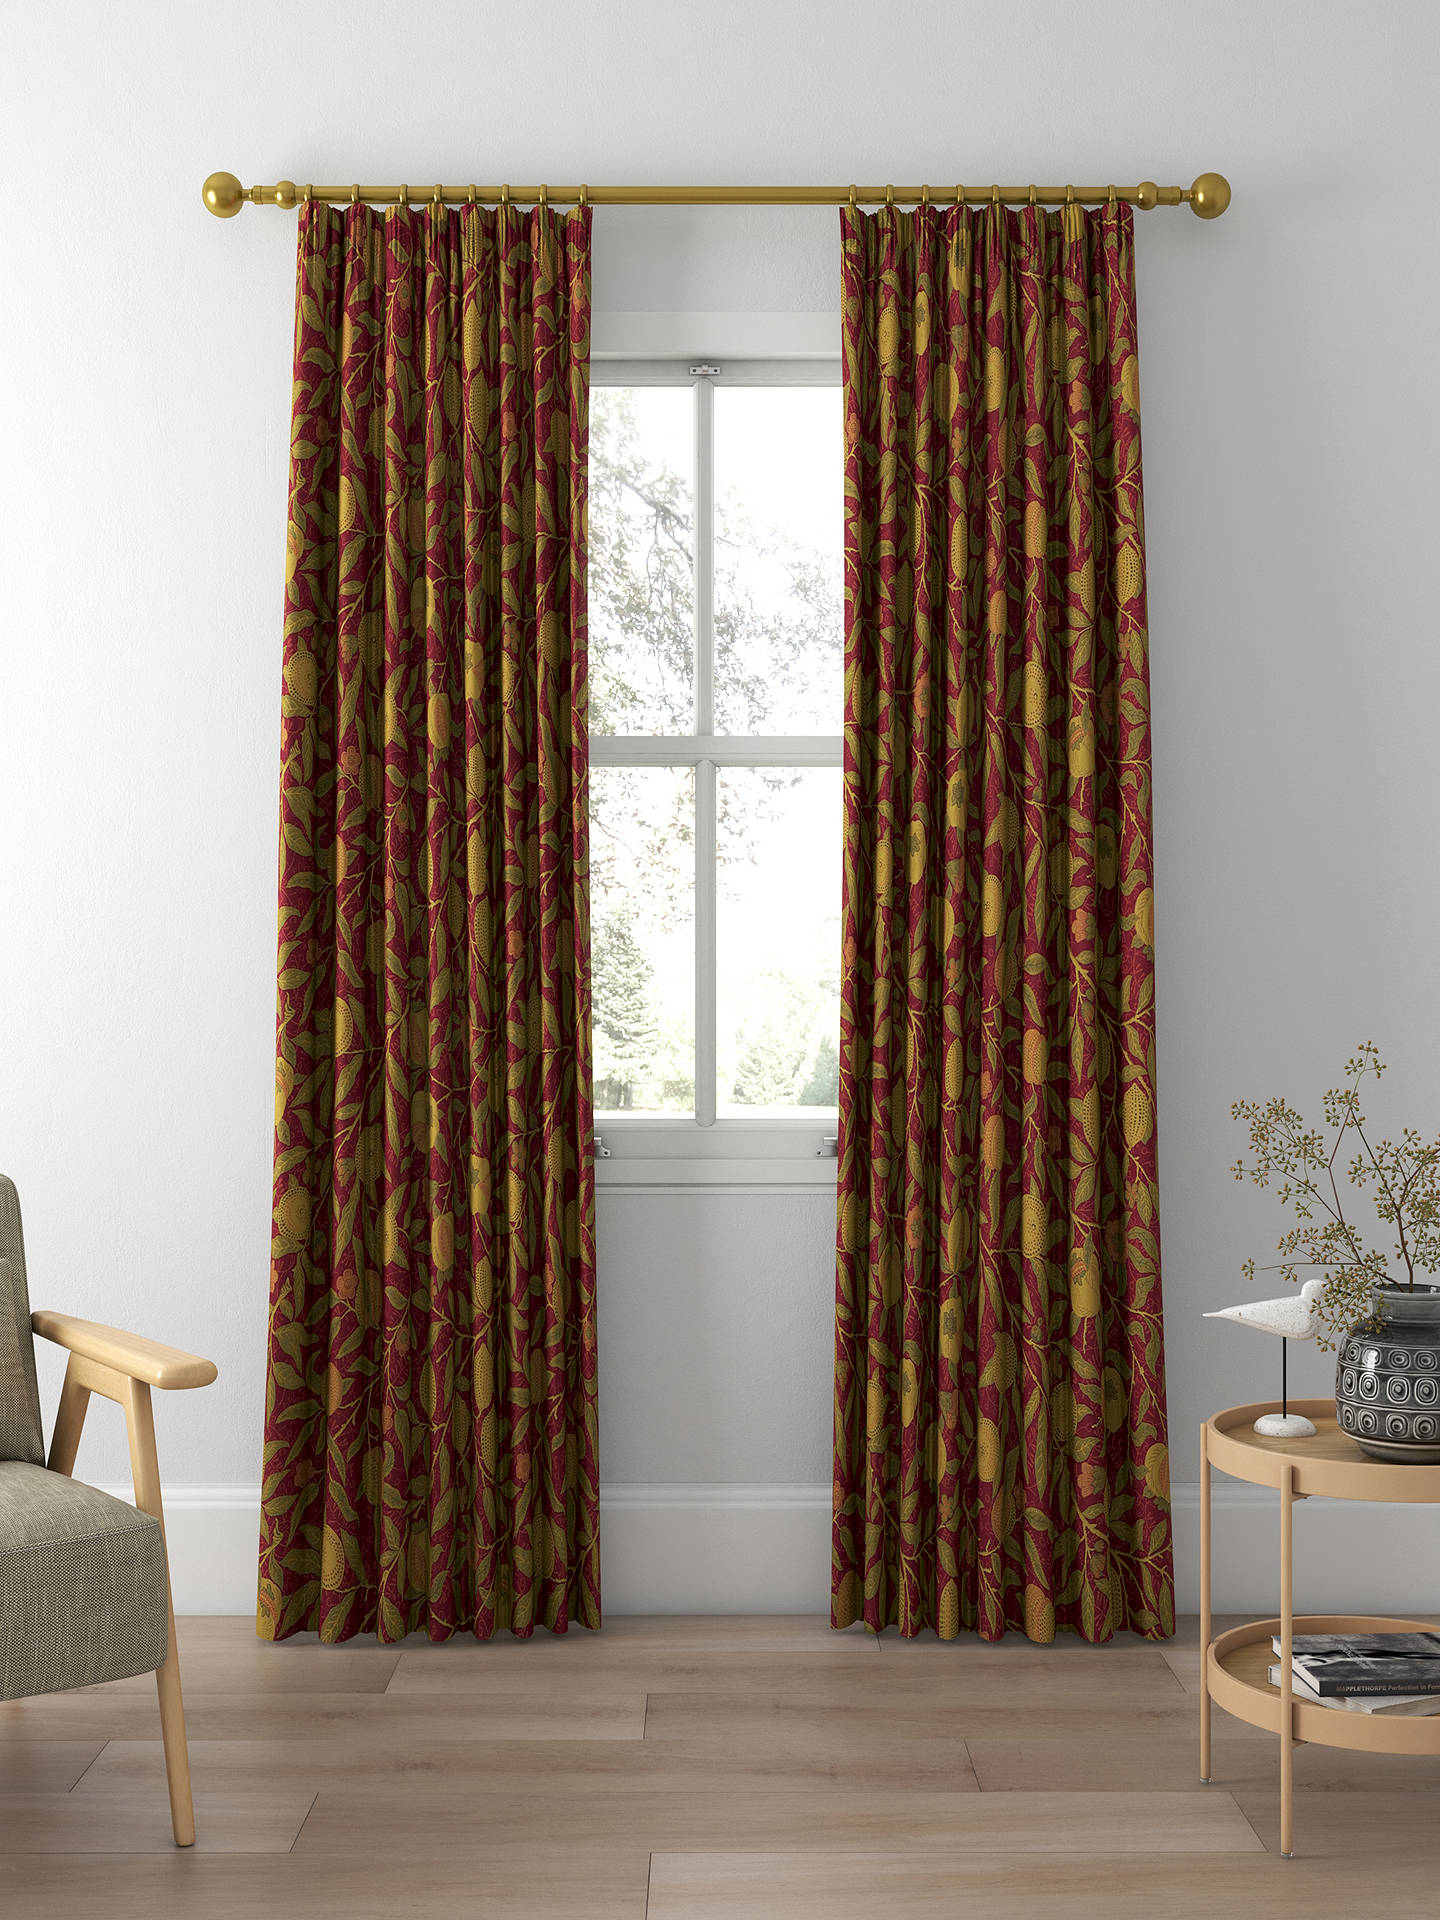 Morris & Co. Fruit Made to Measure Curtains, Crimson/Thyme